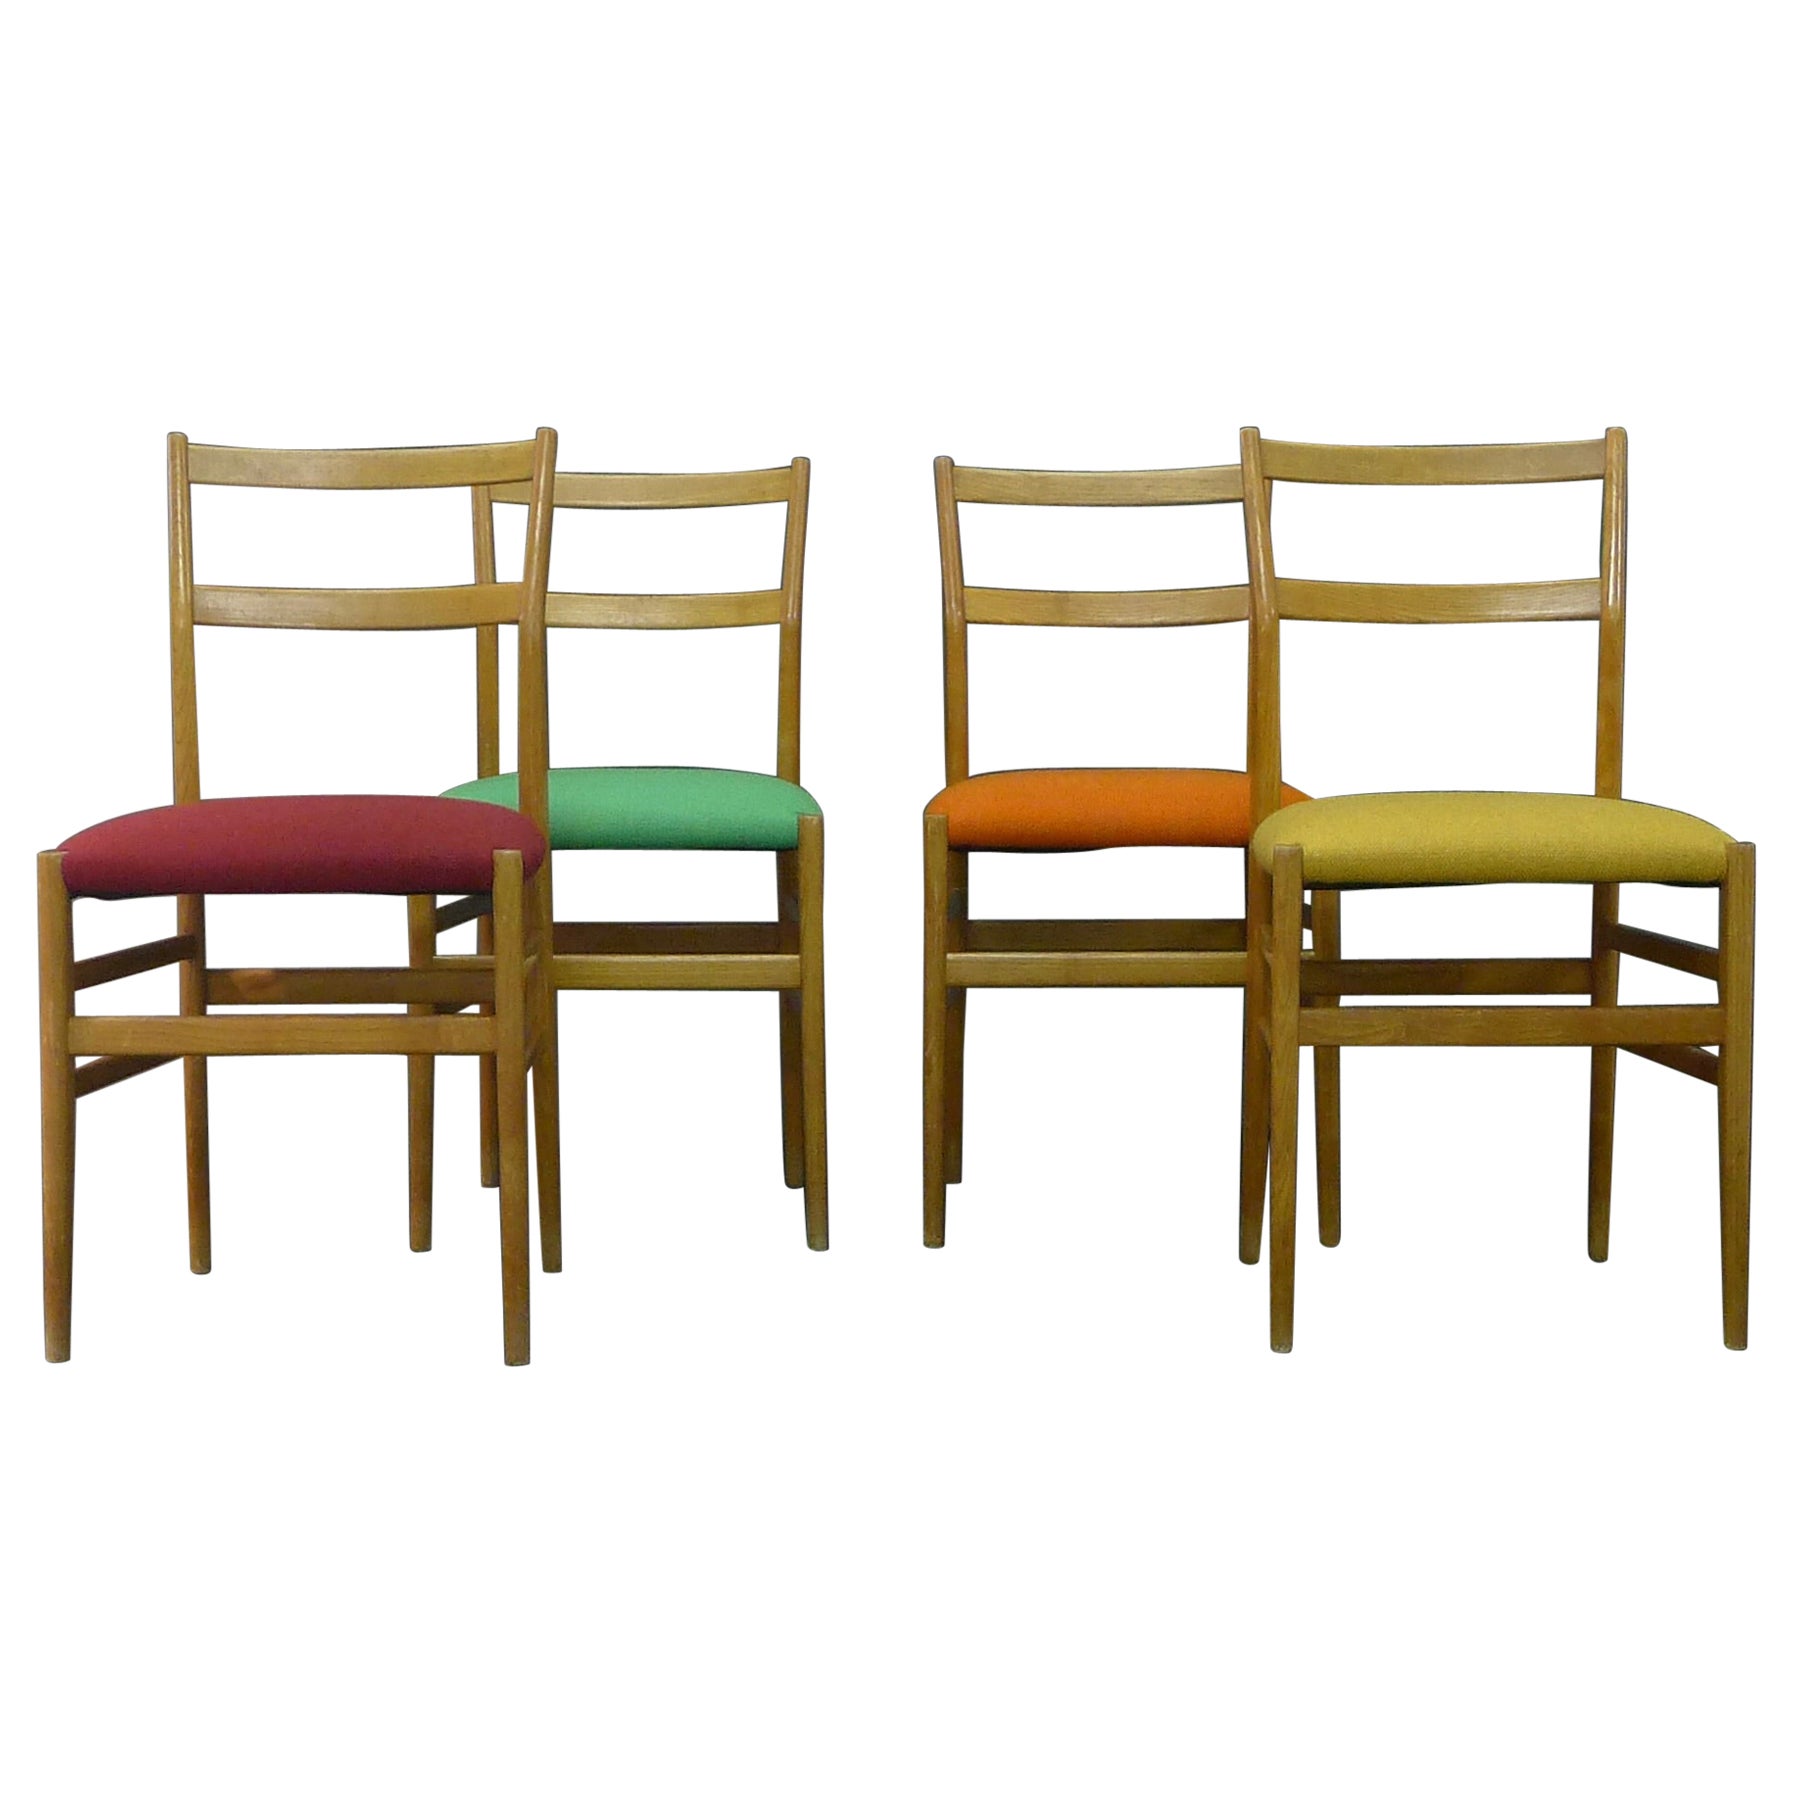 Gio Ponti for Cassina, Harlequin Set of Leggera Chairs, Model 646 in Ash, 1950s For Sale